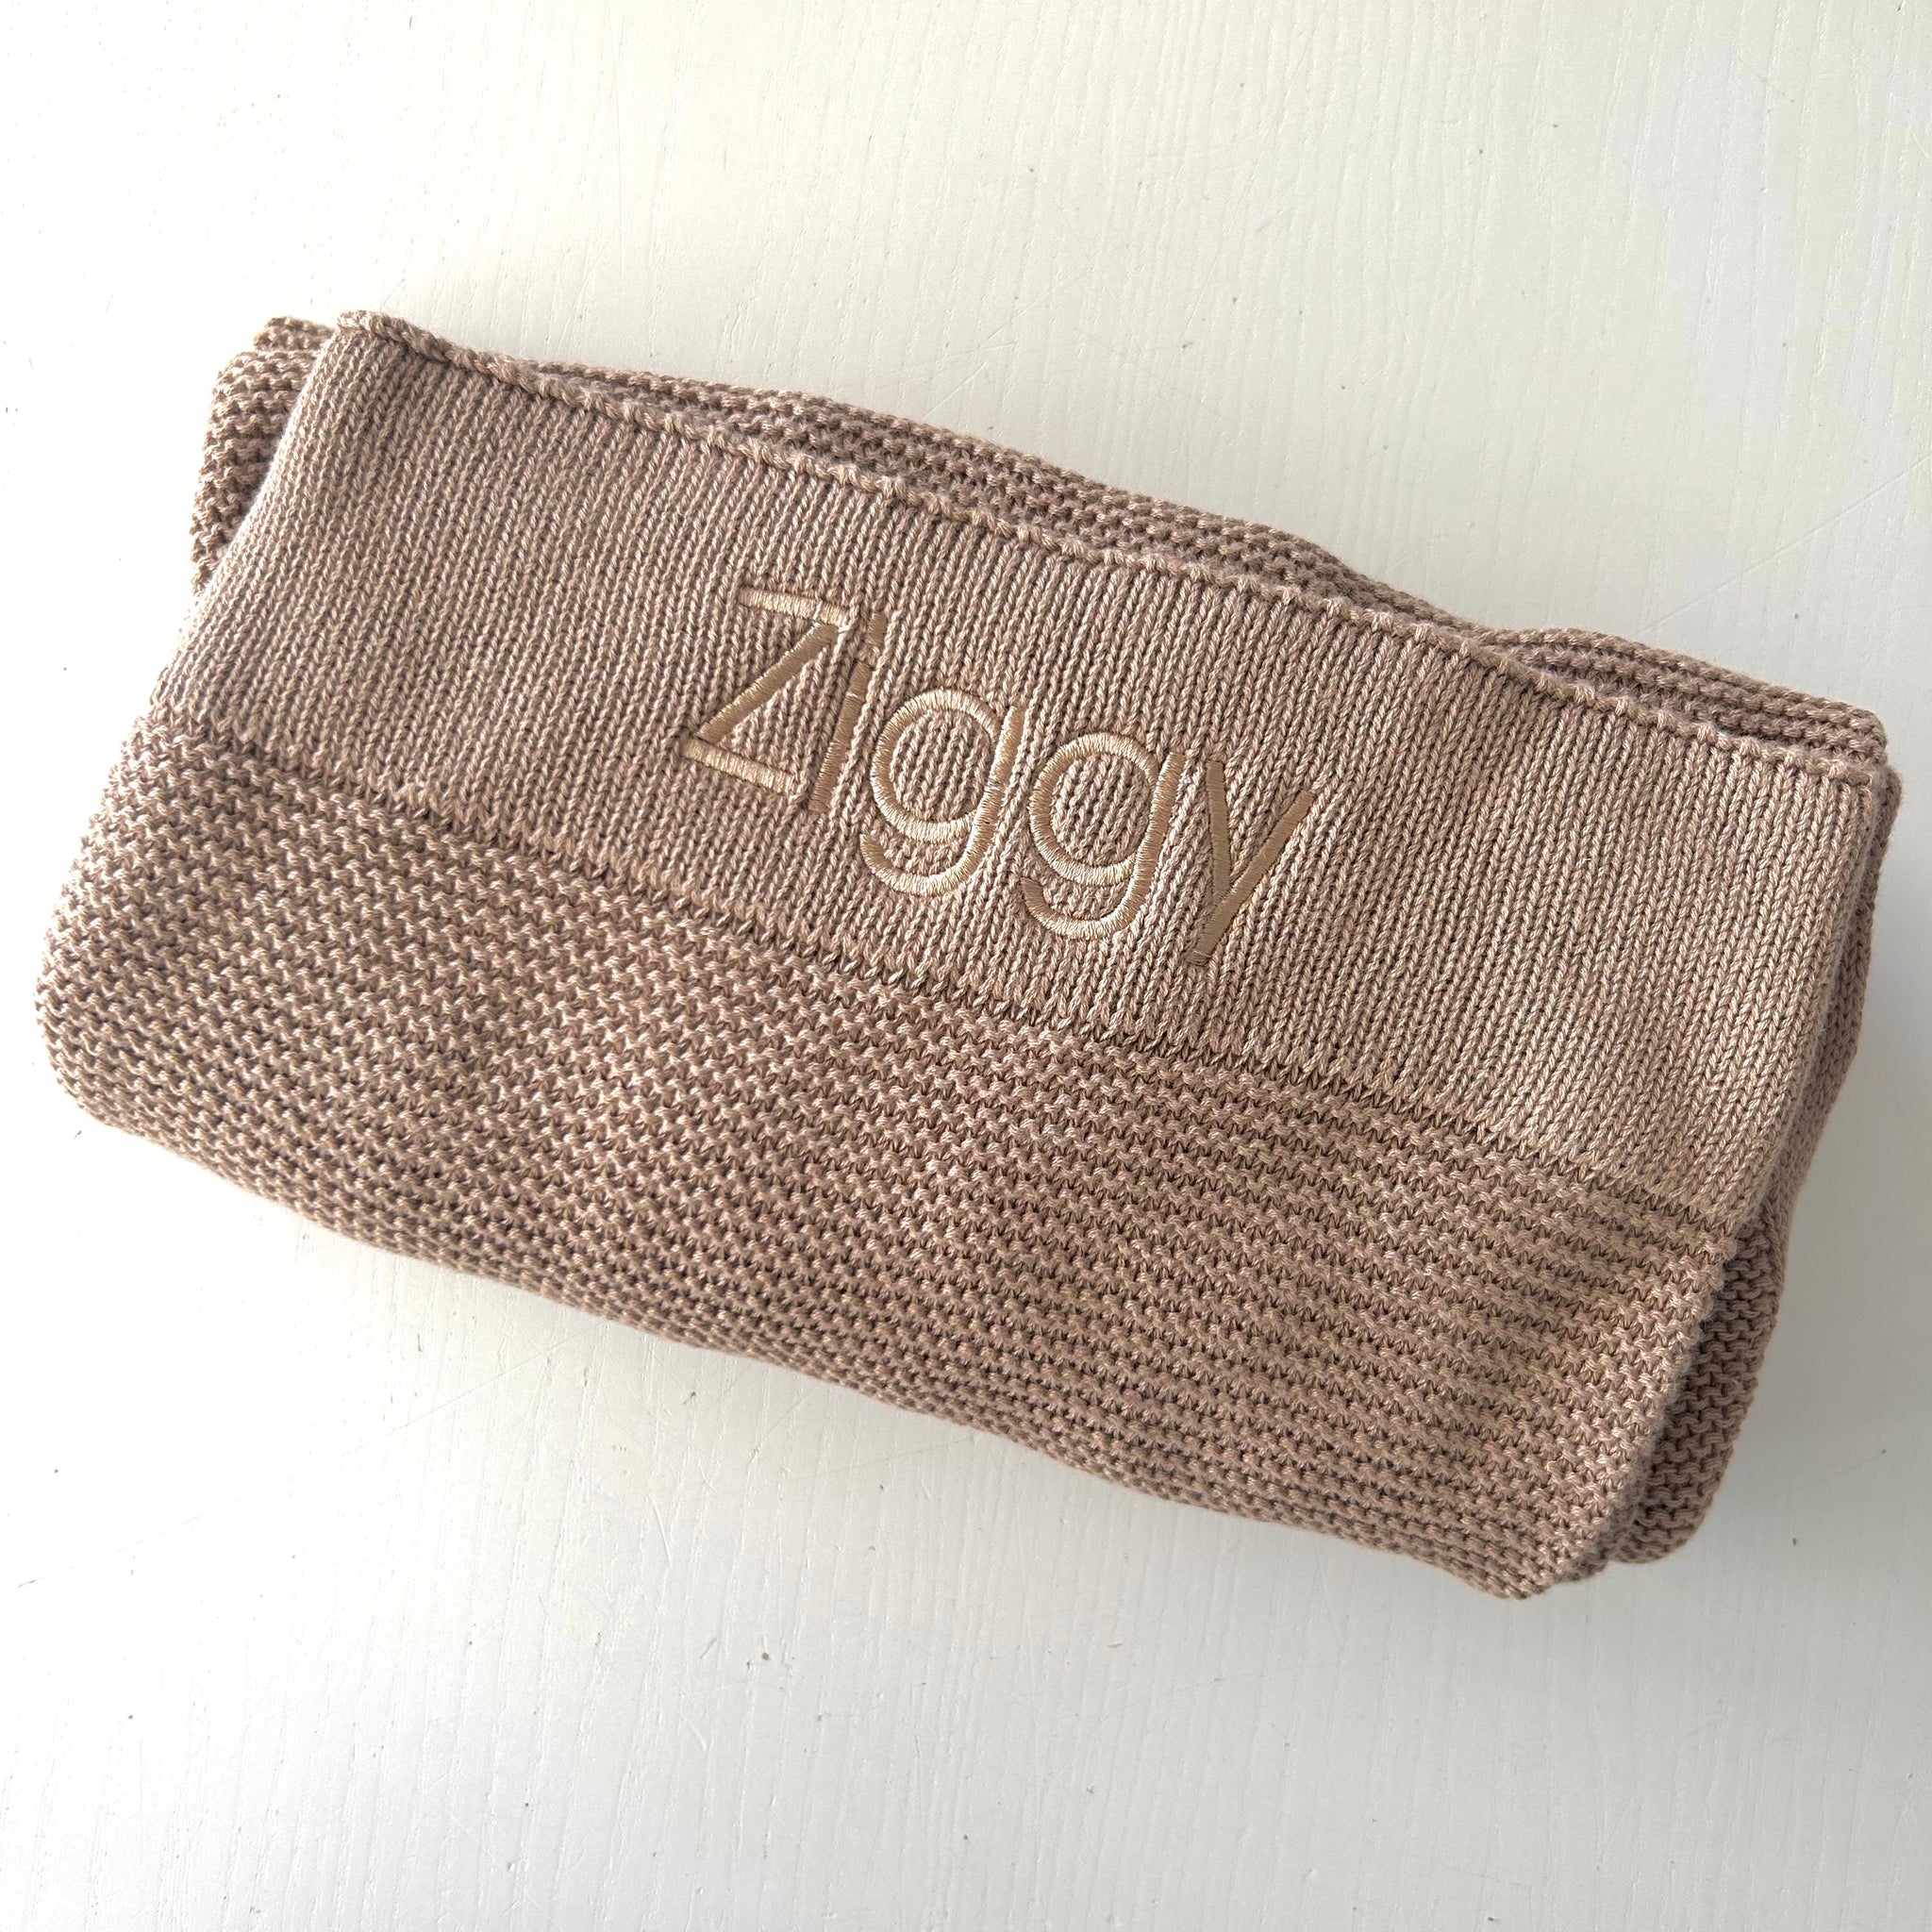 Personalised gift for baby Ziggy. special brown blanket embroided with babies name on sale! 